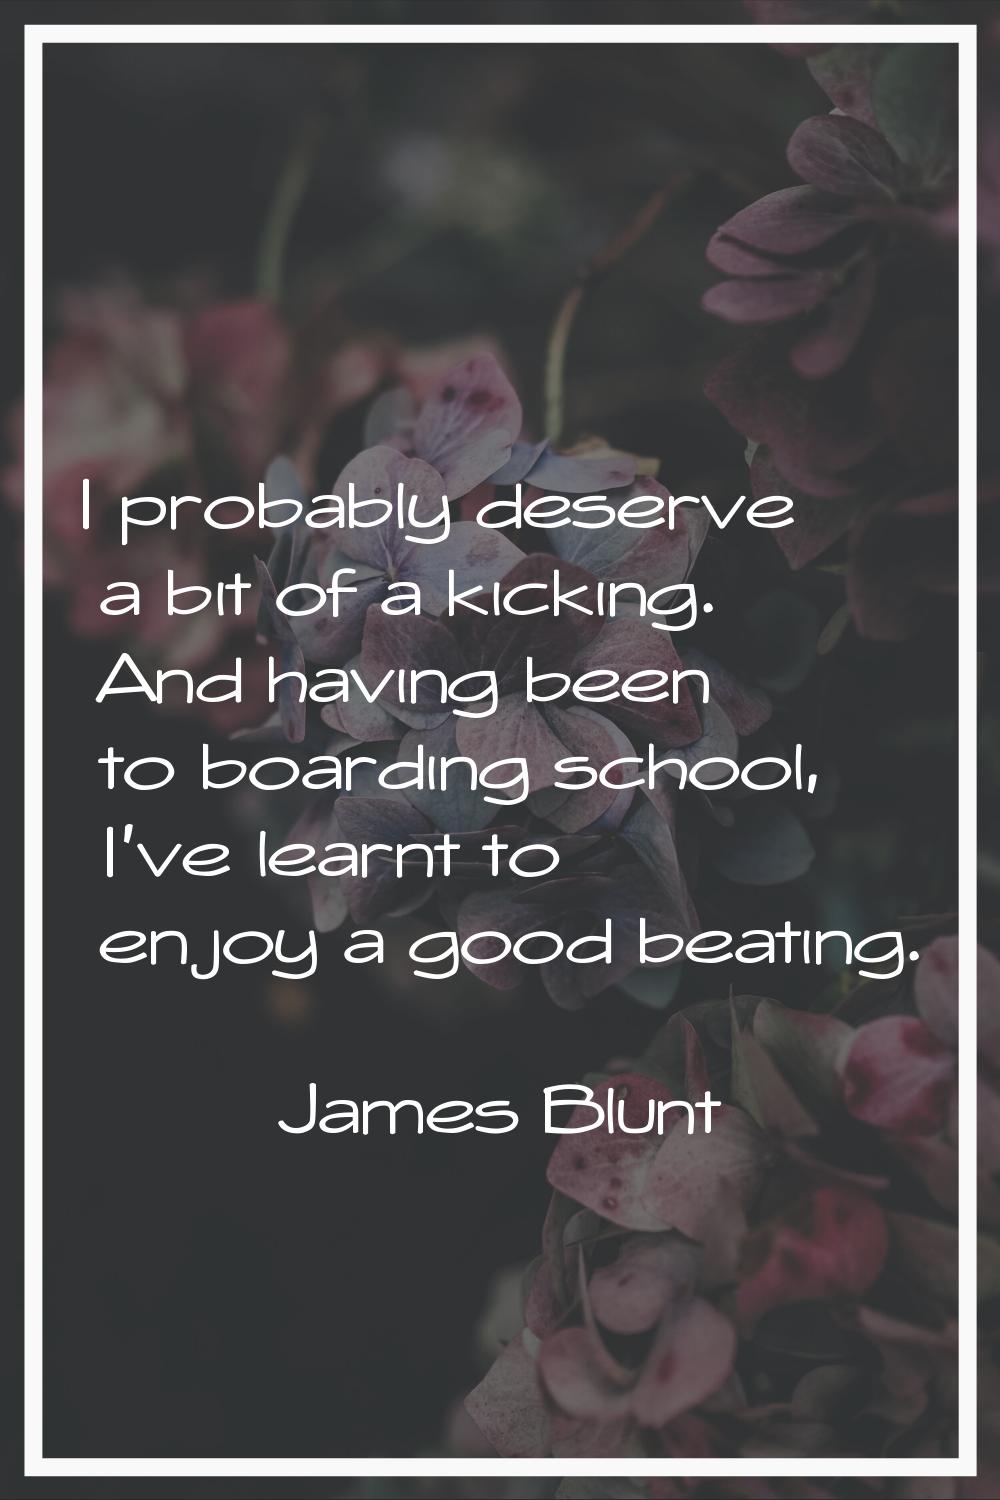 I probably deserve a bit of a kicking. And having been to boarding school, I've learnt to enjoy a g